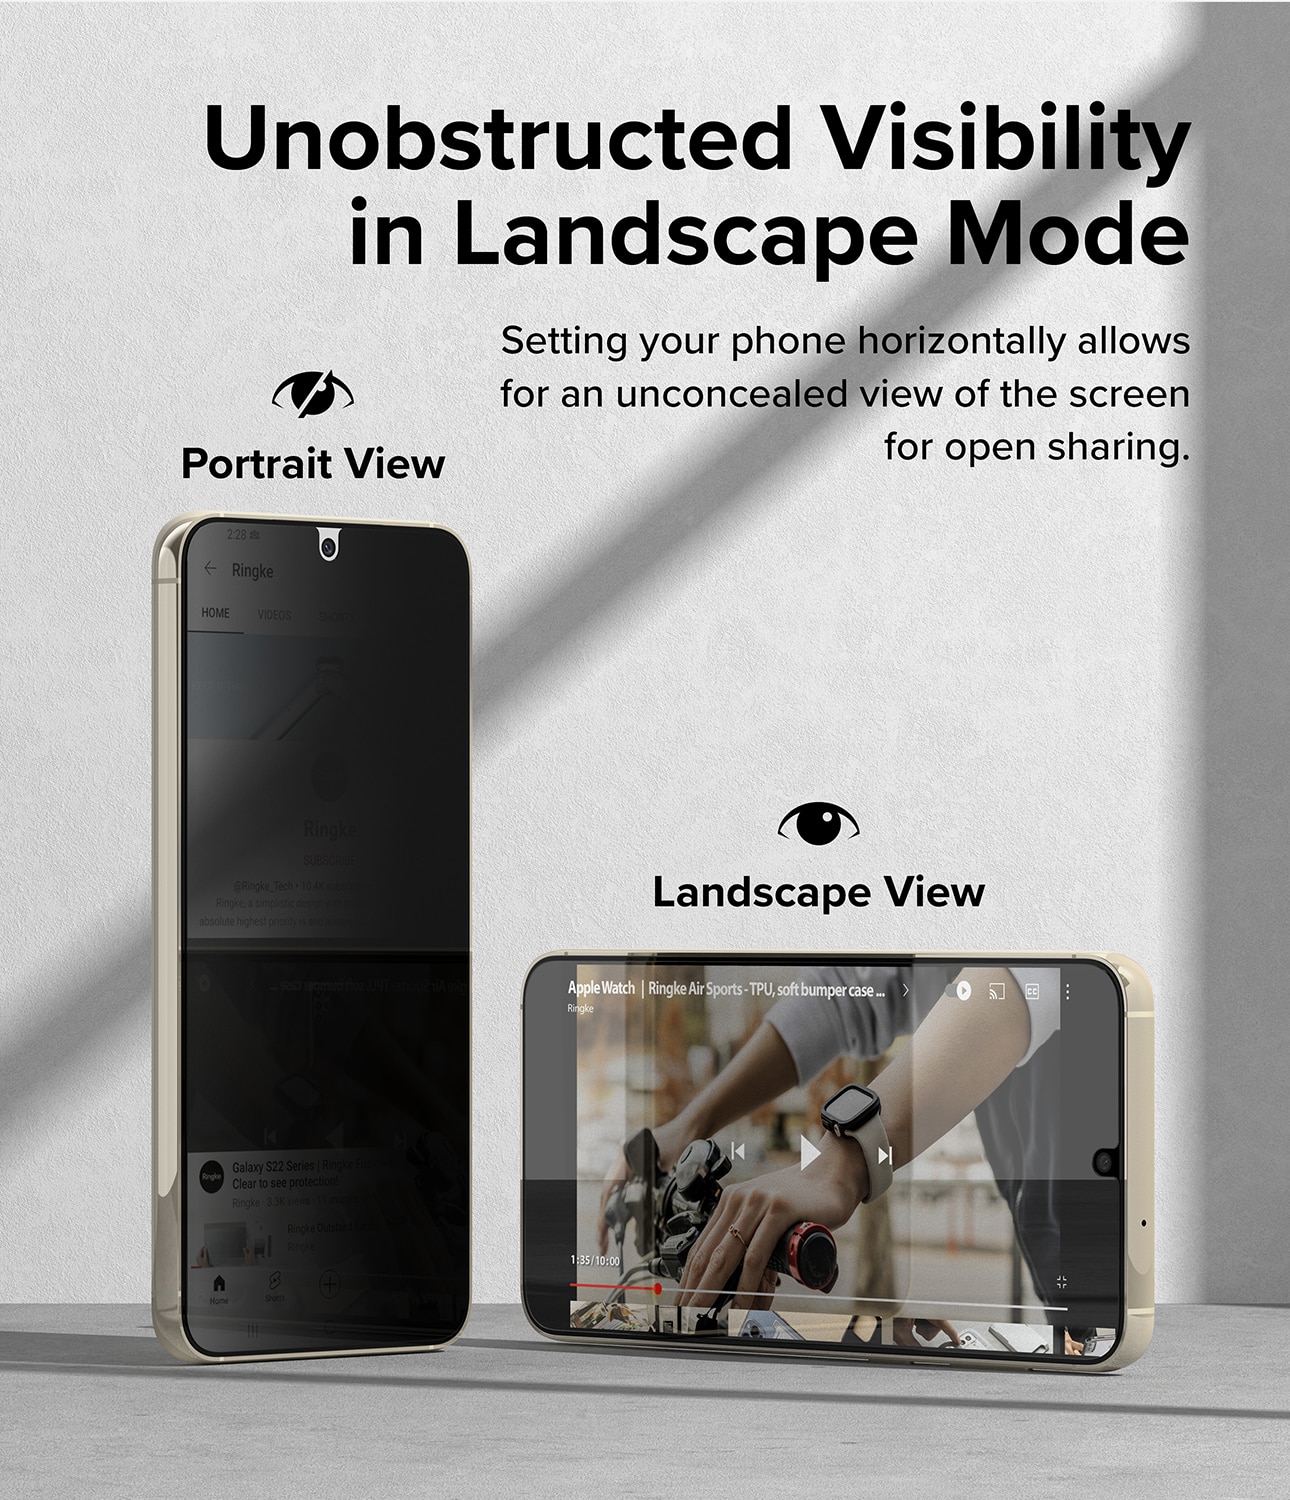 Samsung Galaxy S23 Privacy Screen Protector Glass